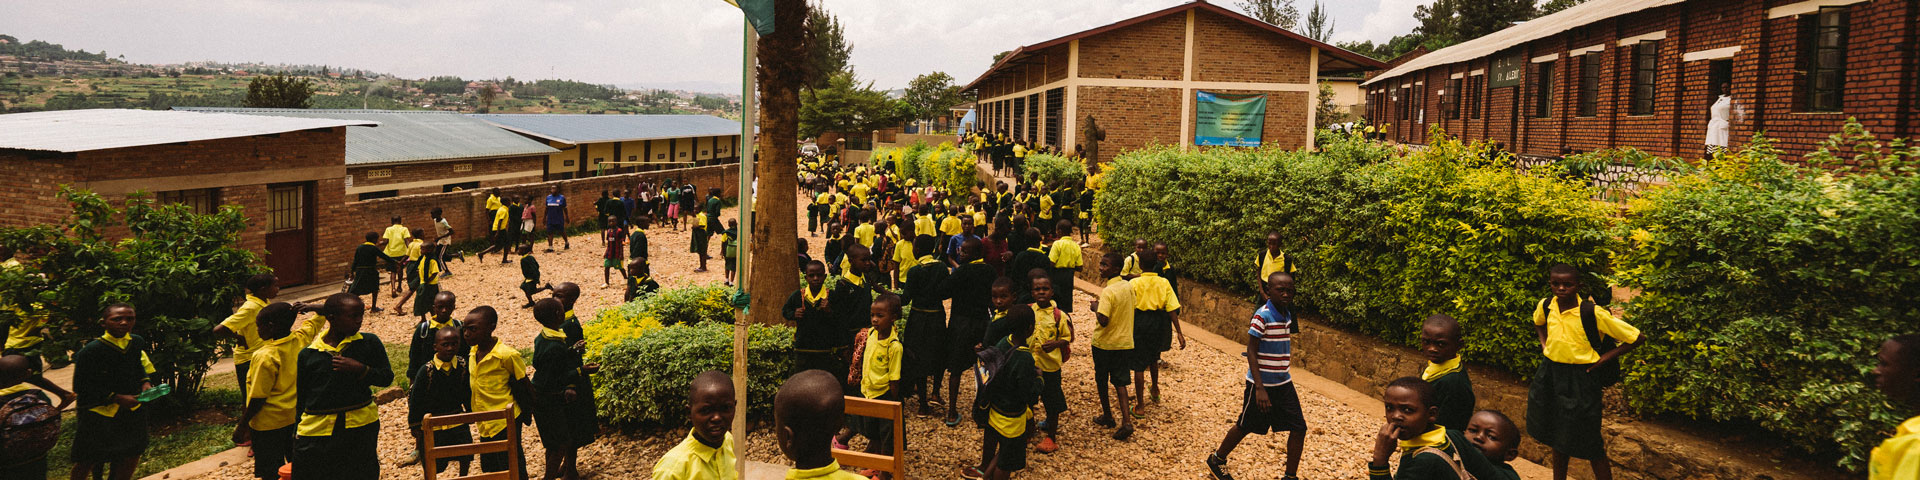 Vision 2024: For Every Child | The Wellspring Foundation for Education